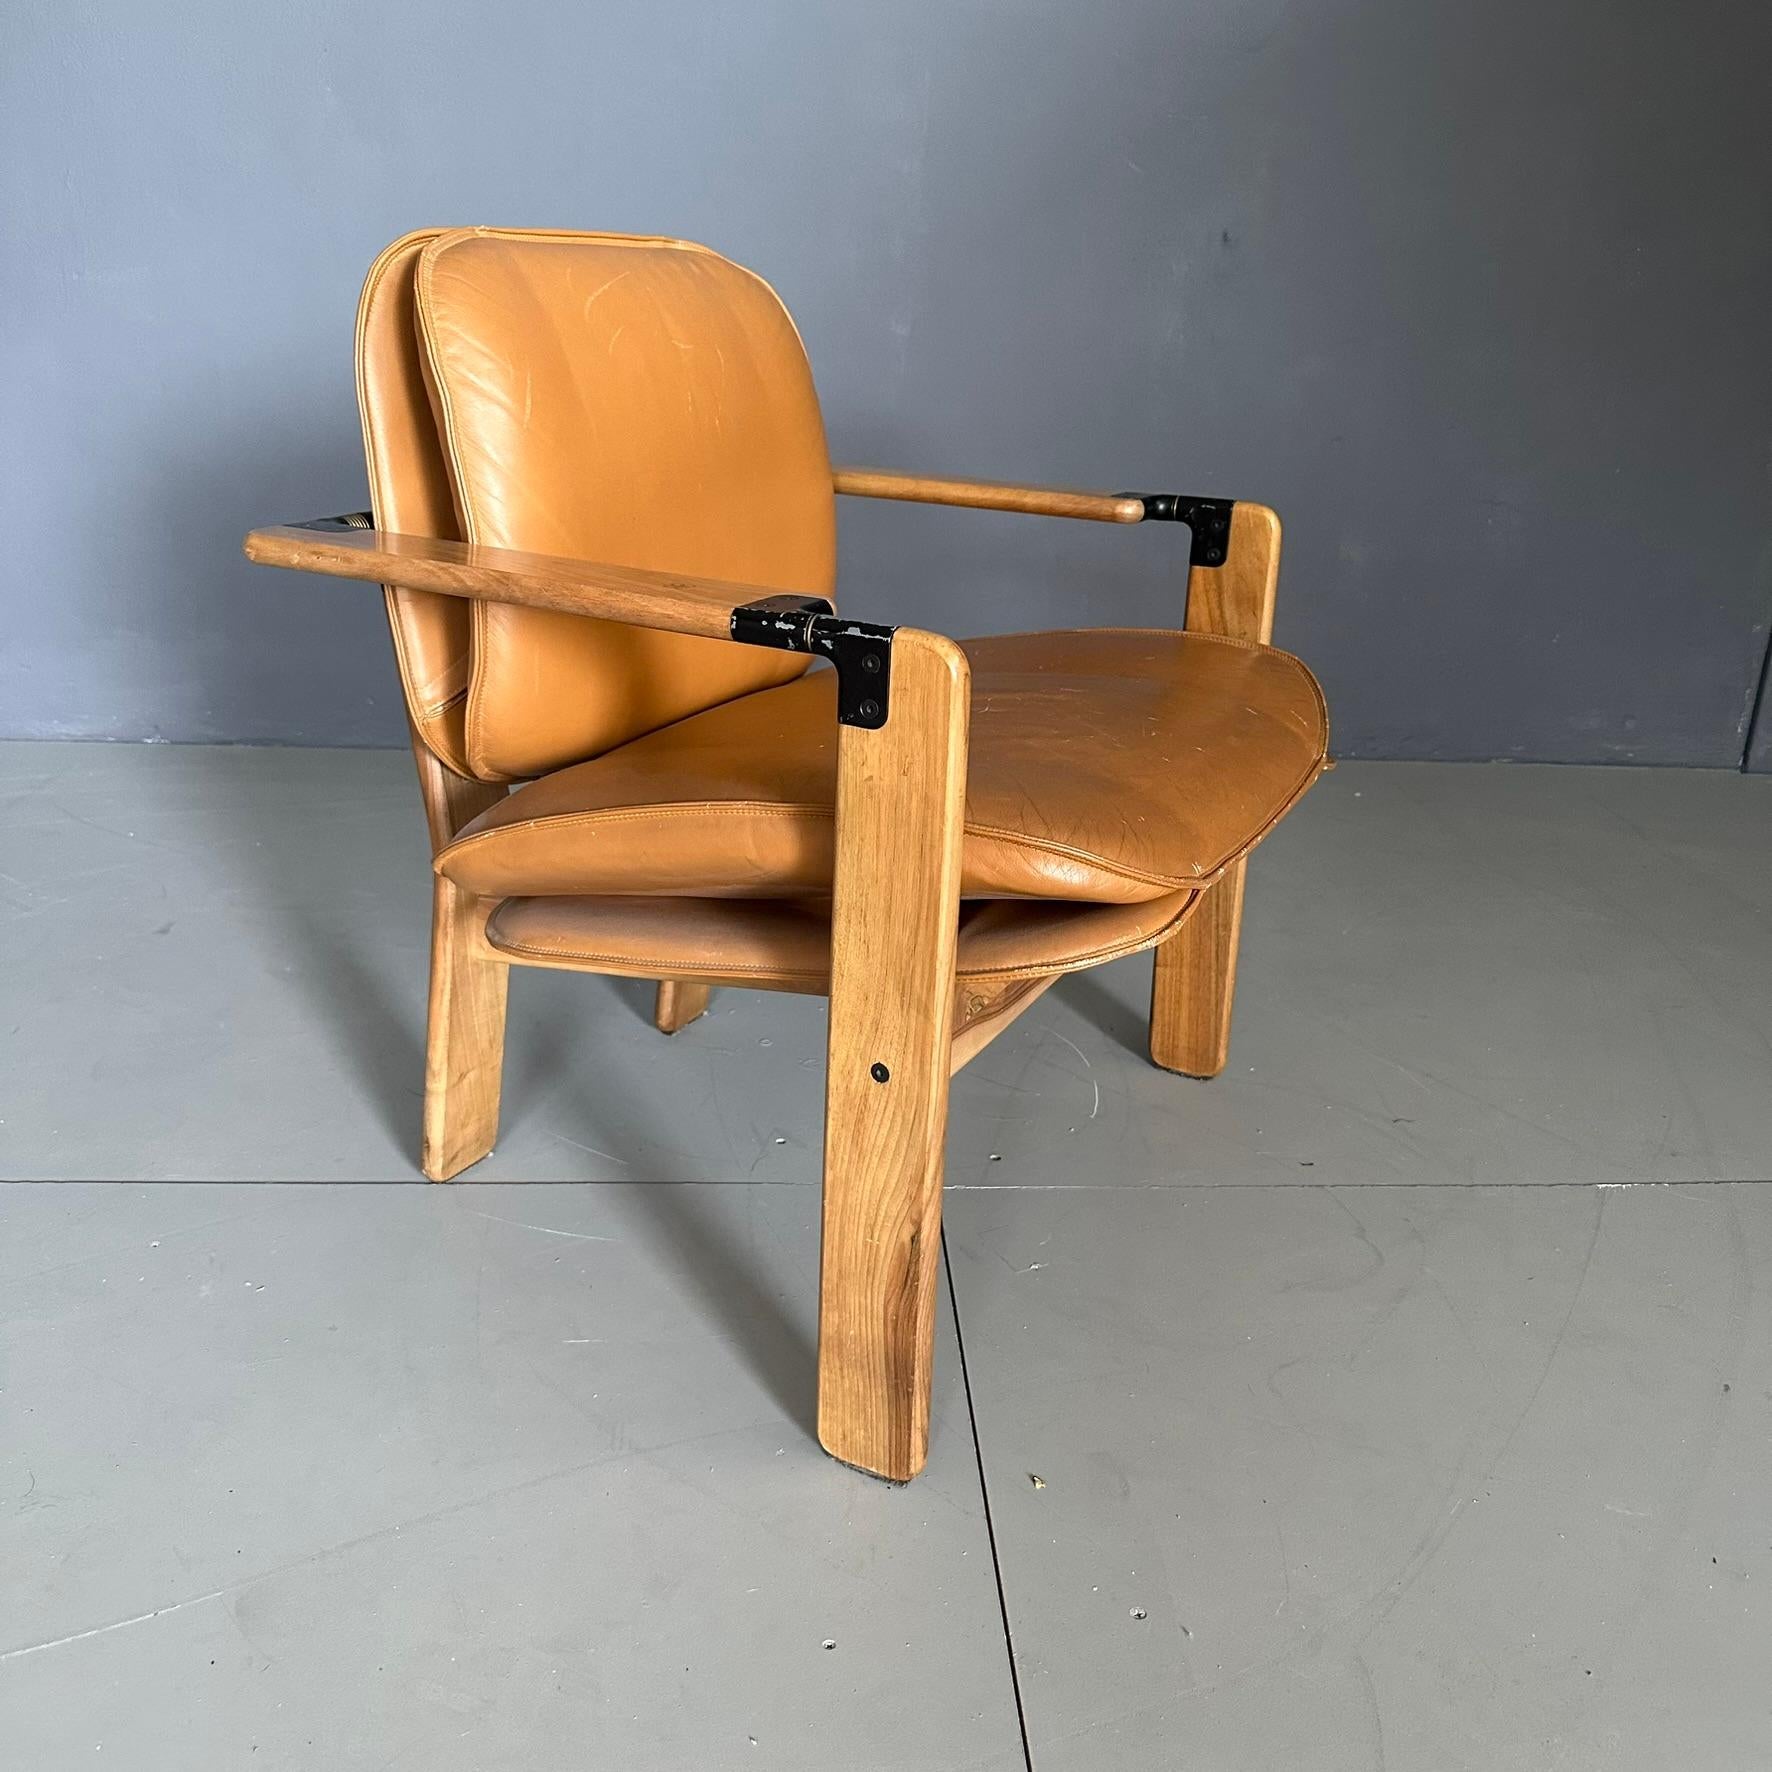 'Dueacca' armchair, design by Franco Poli, Bernini production, Italian manufacturing dating back to the 1980s.
The armchair has a wooden structure with a very particular characteristic: the rear legs are closer together in contrast with the wider